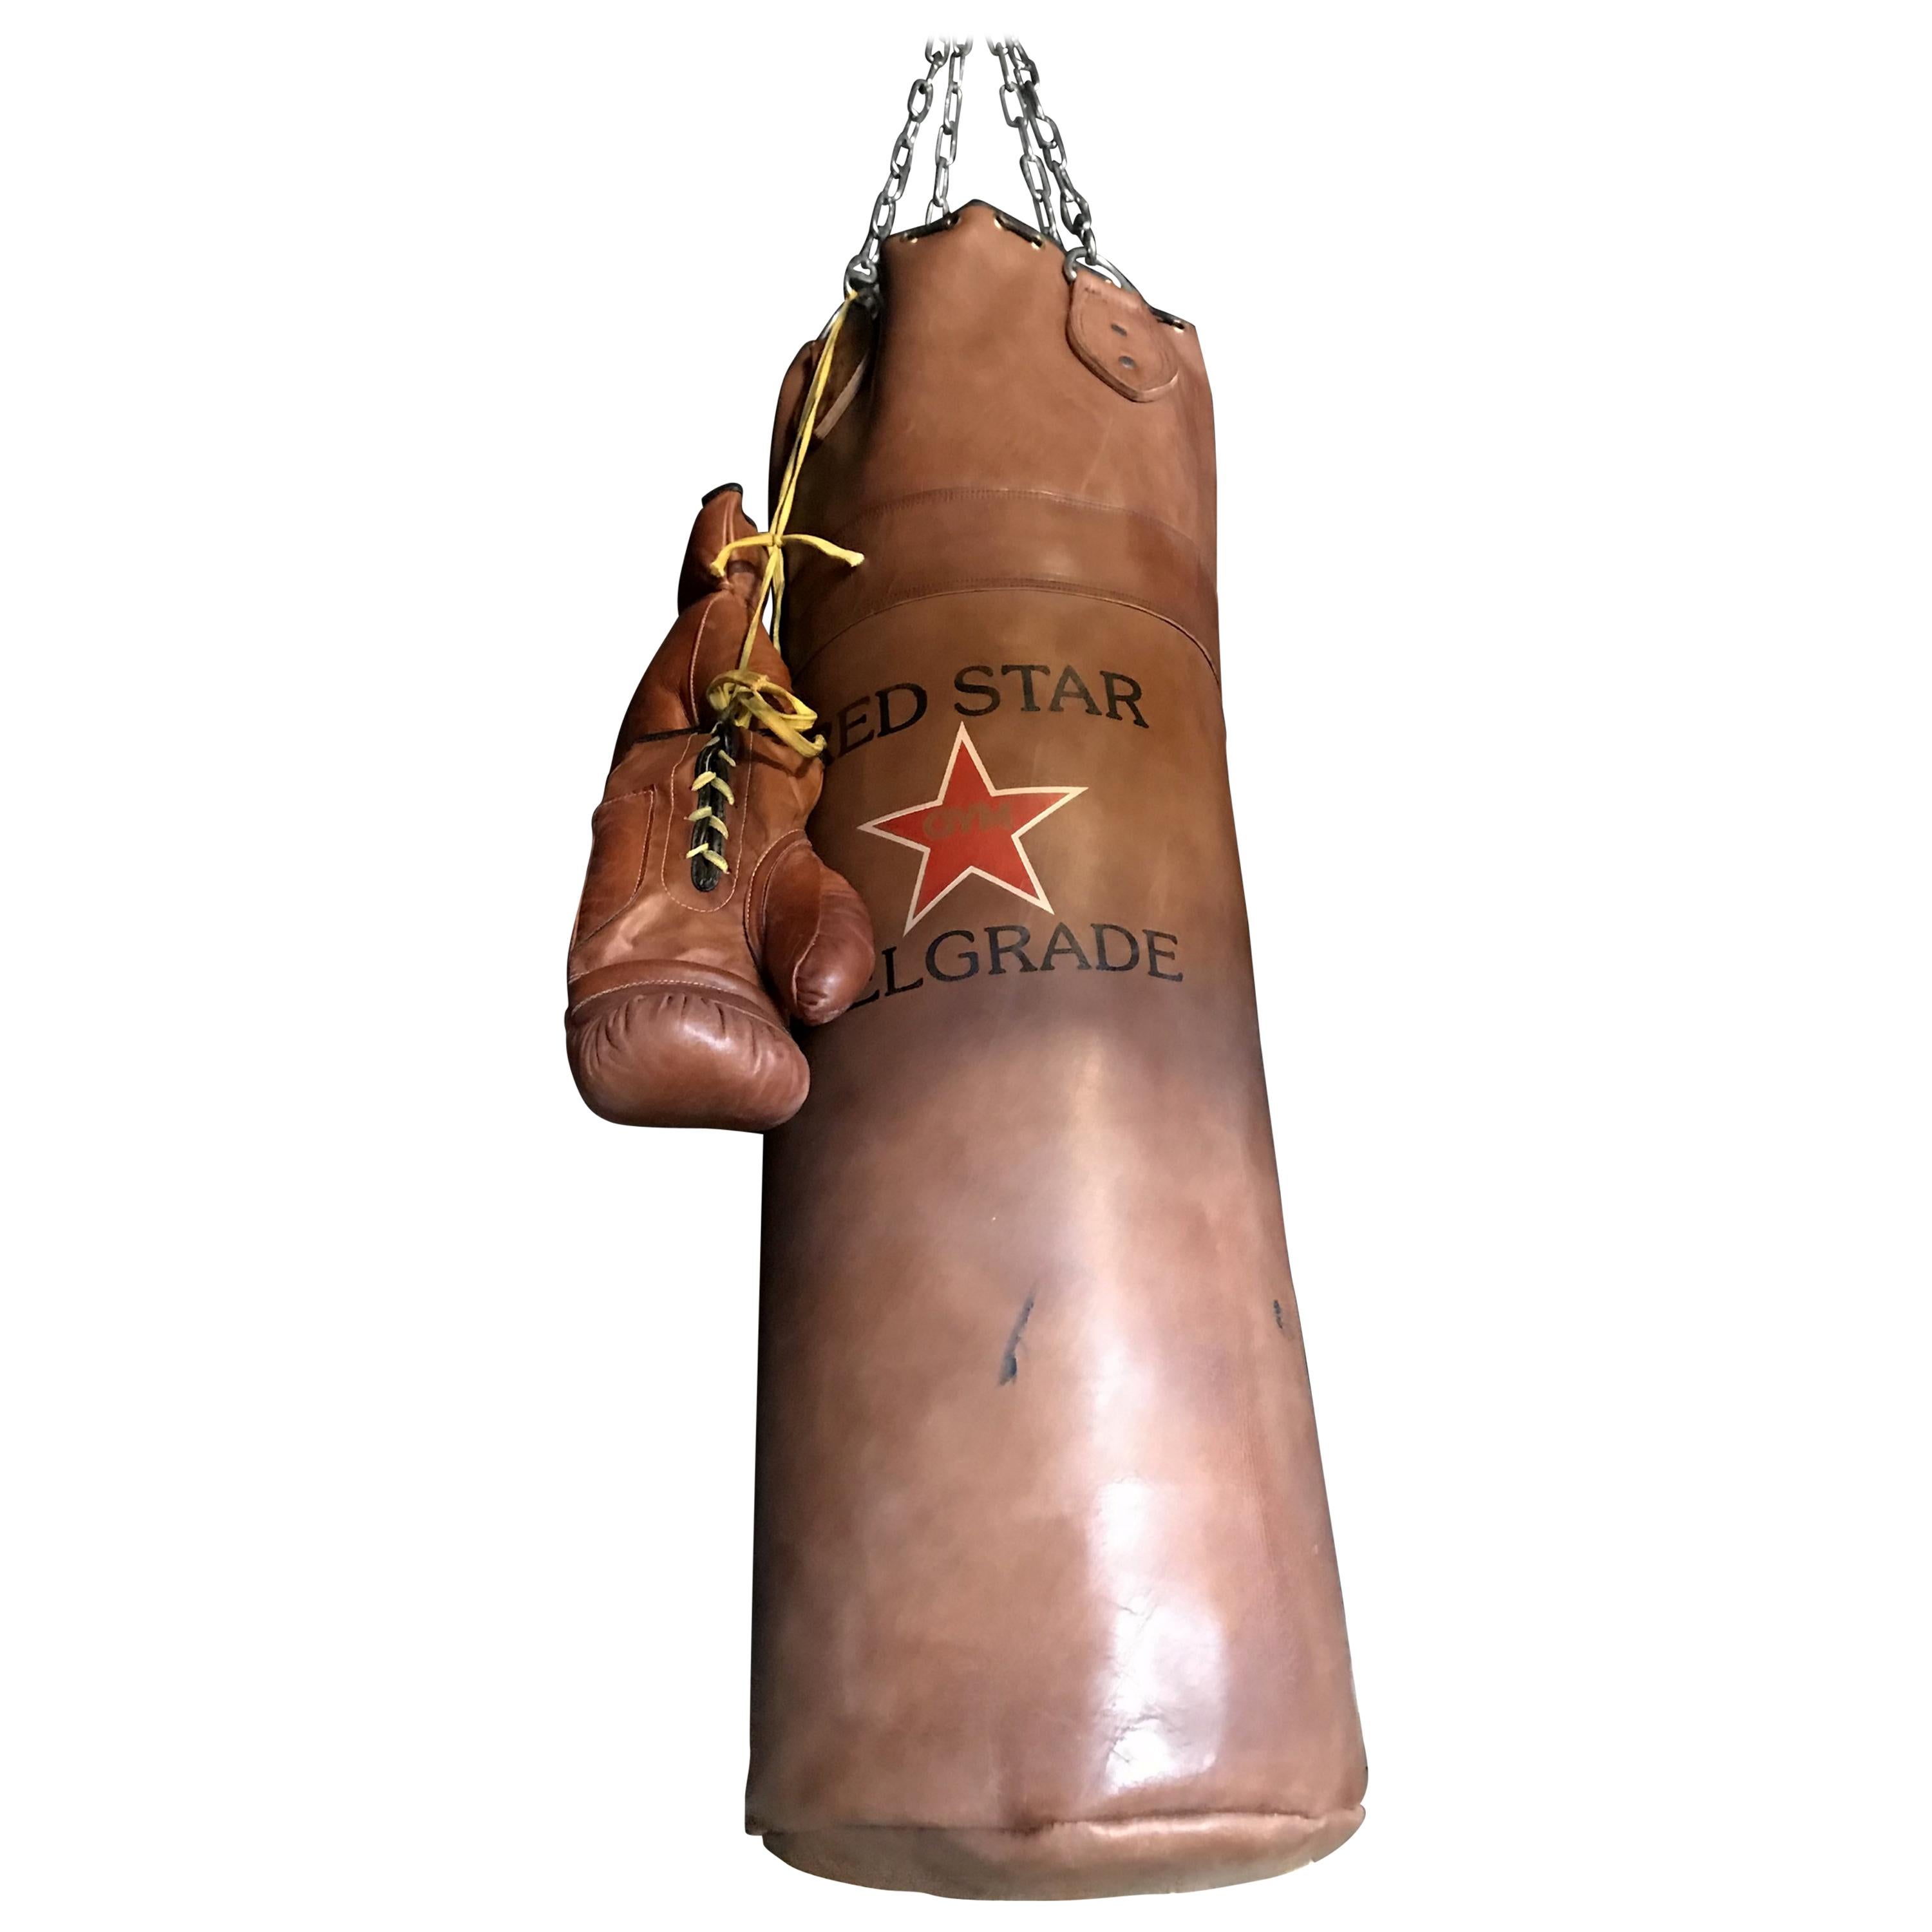 Antique Look "Red Star Belgrade" Leather Punching Bag